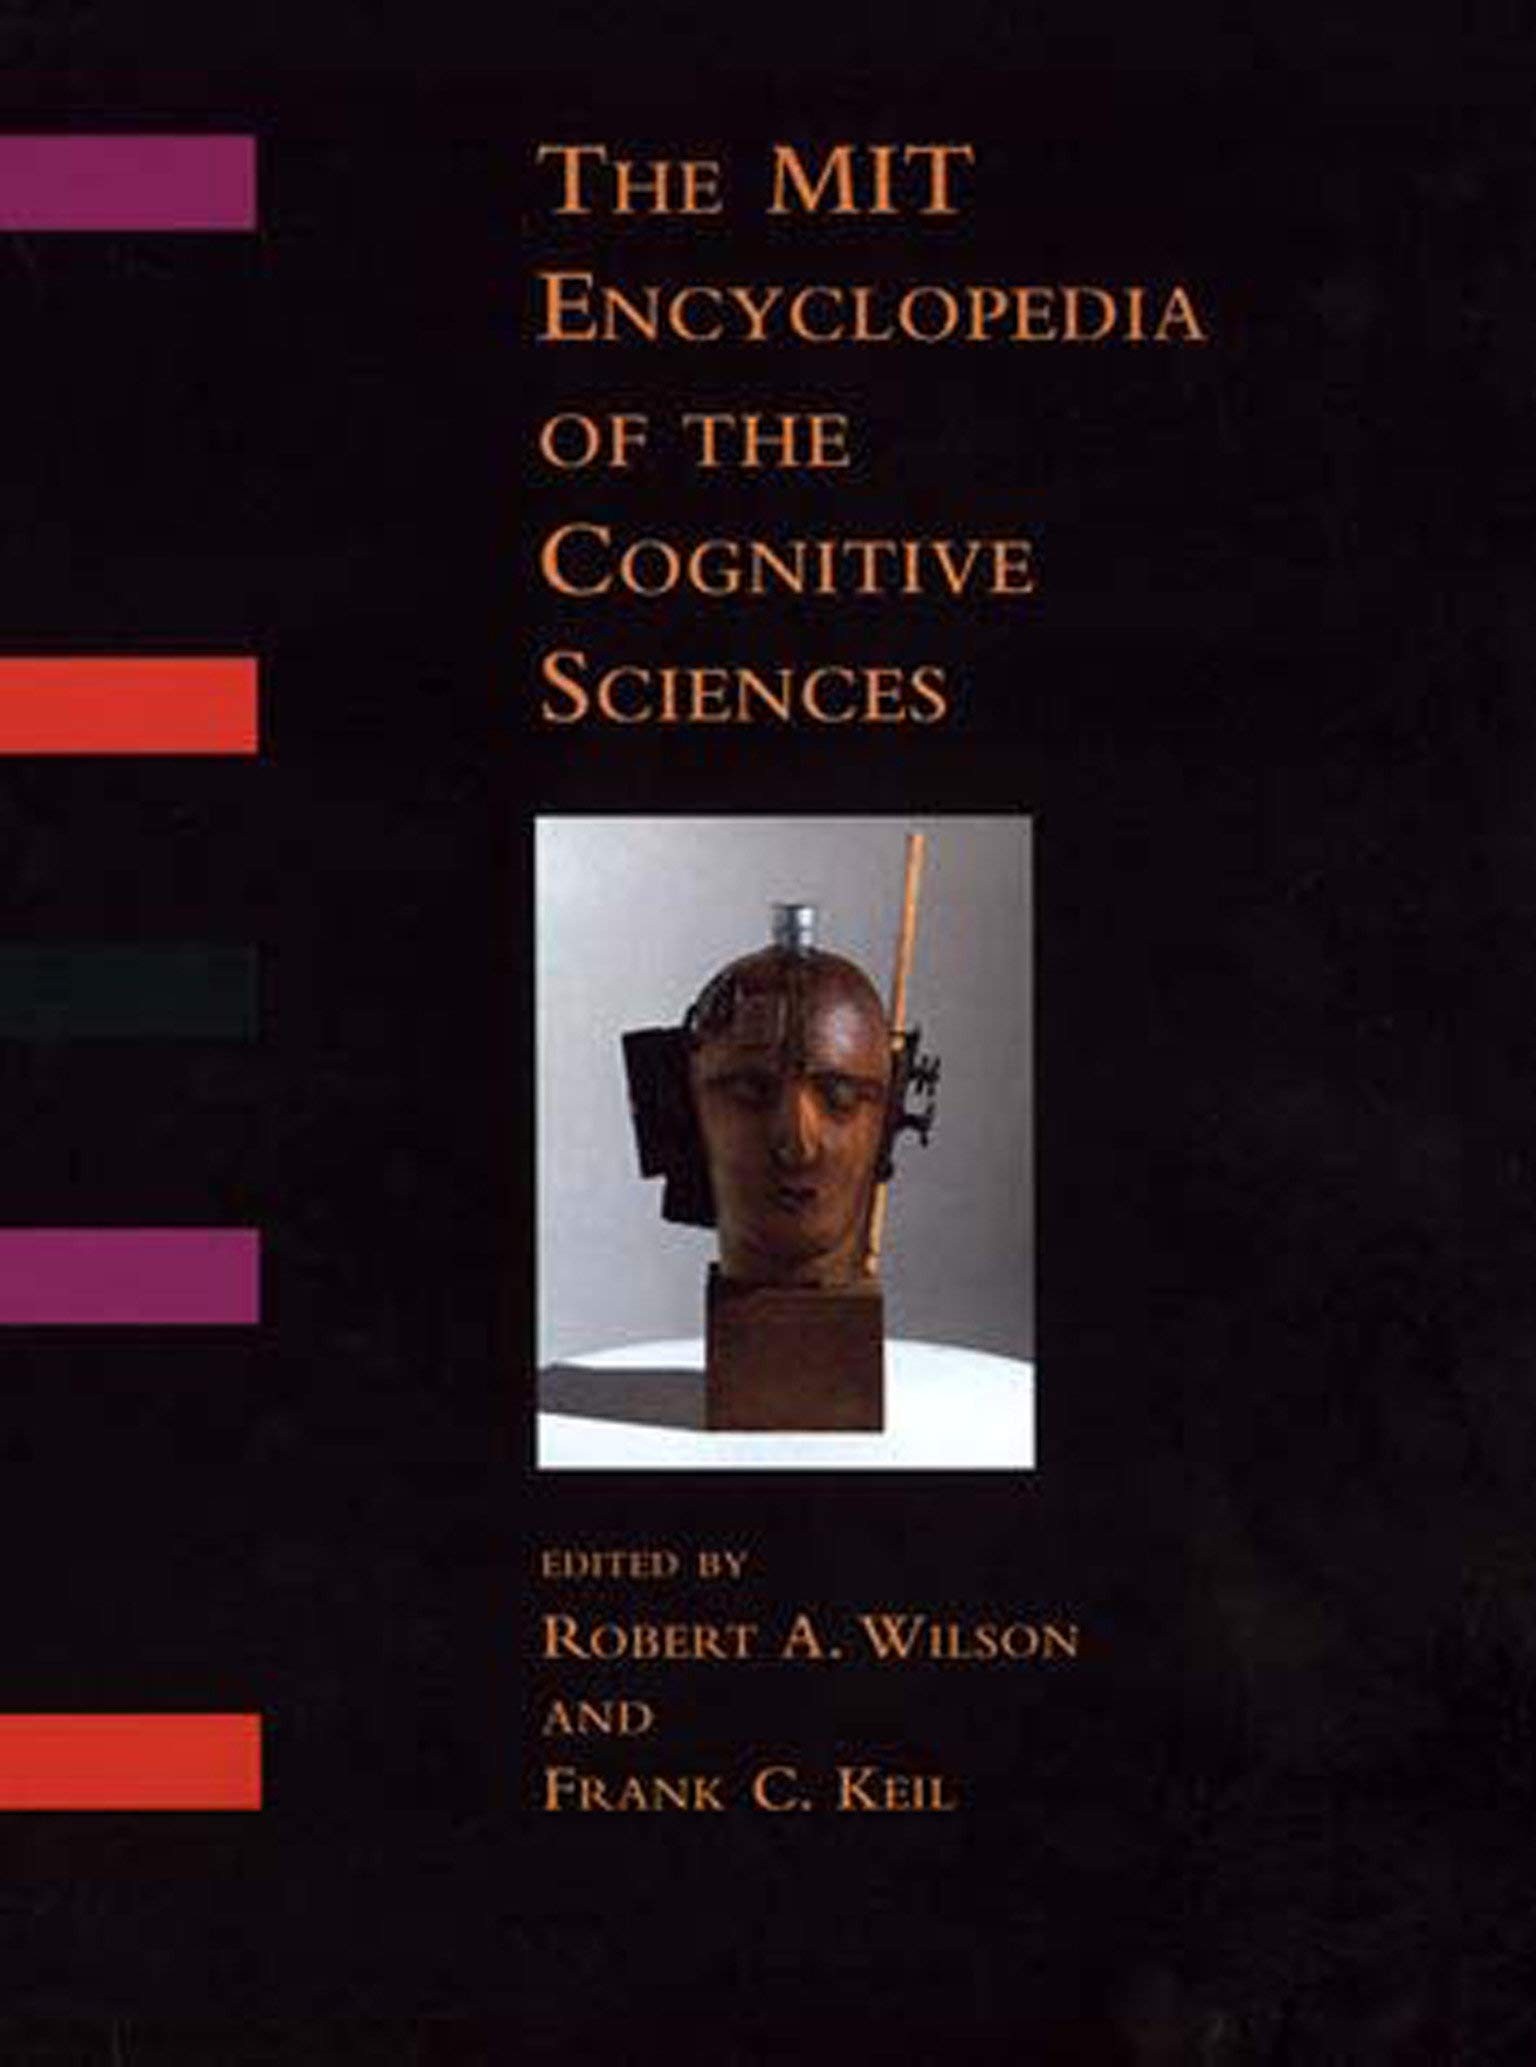 The MIT Encyclopedia of the Cognitive Sciences